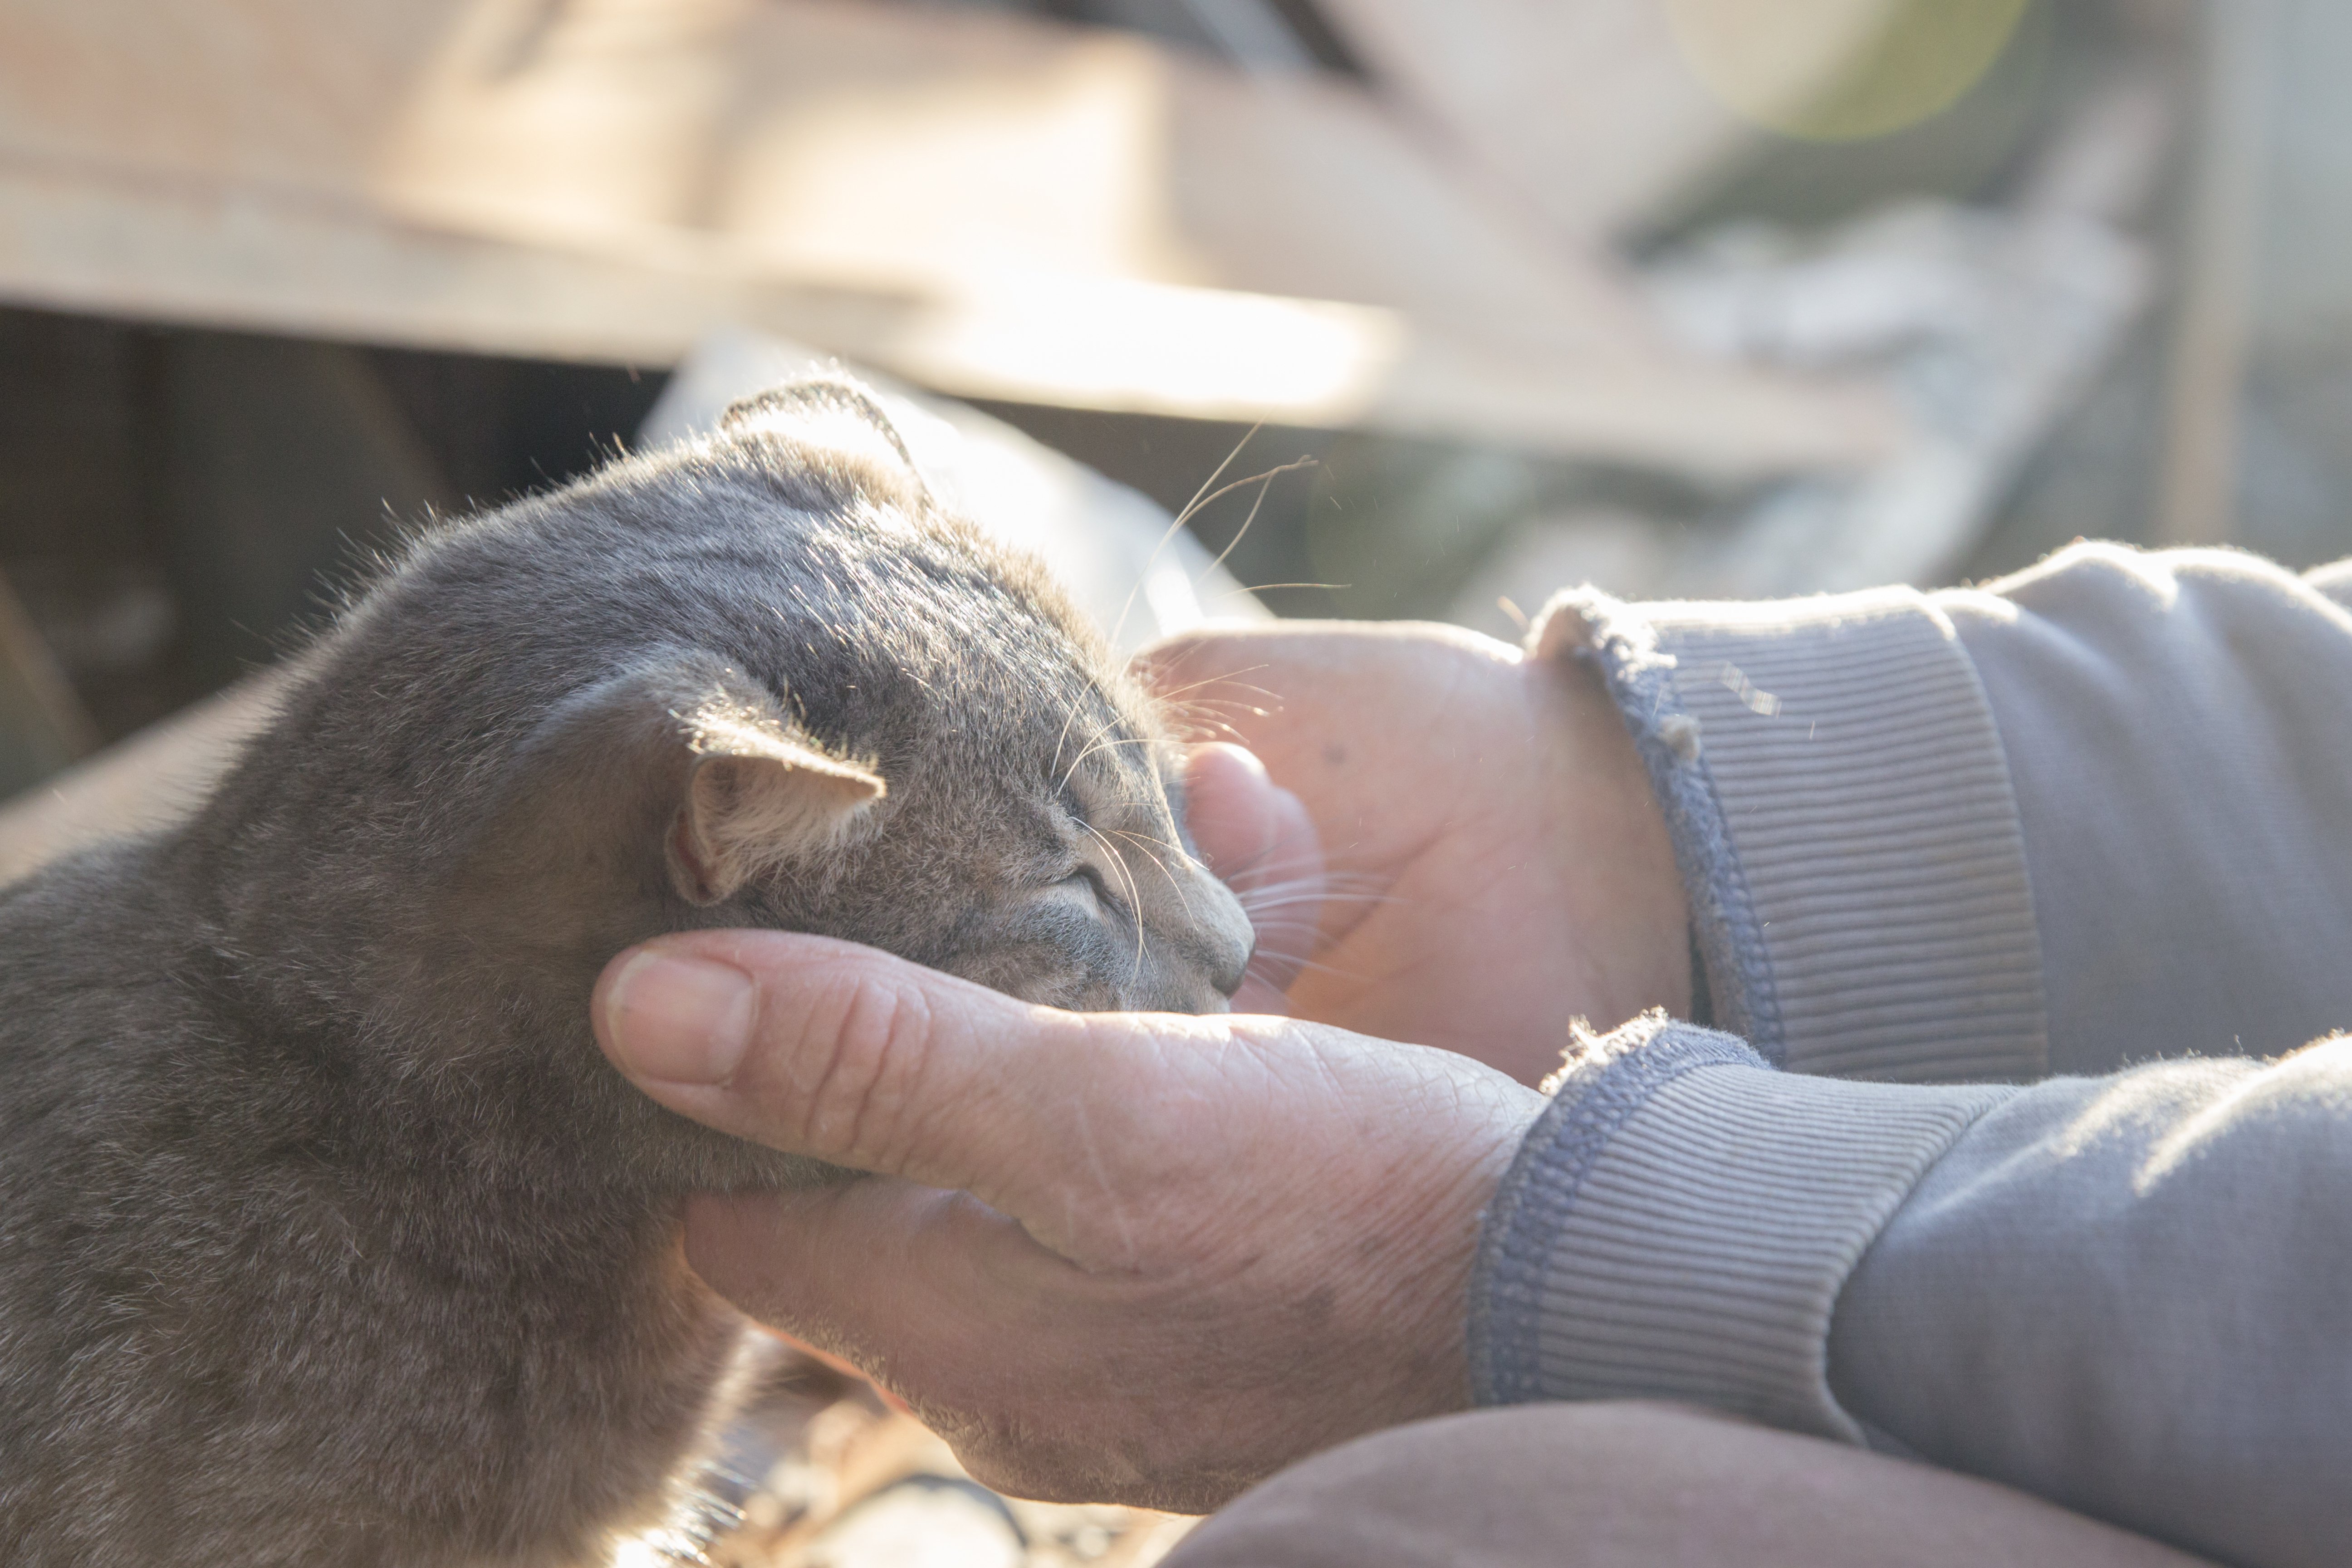 Old man petting a cat. | Source: Shutterstock